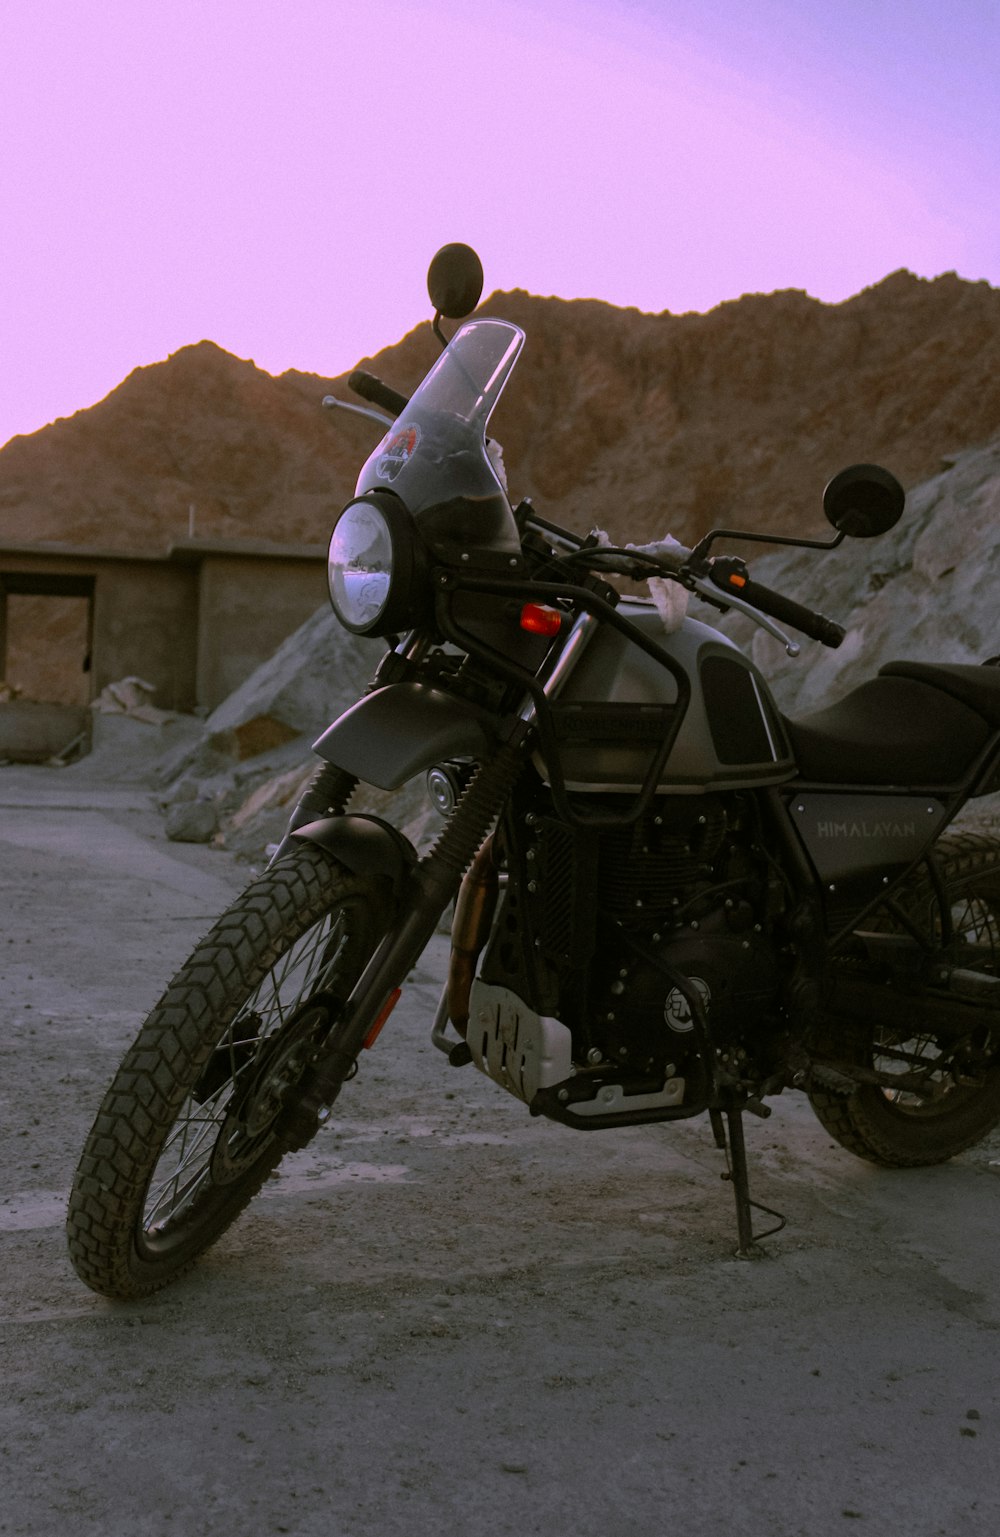 a motorcycle parked in a parking lot with mountains in the background